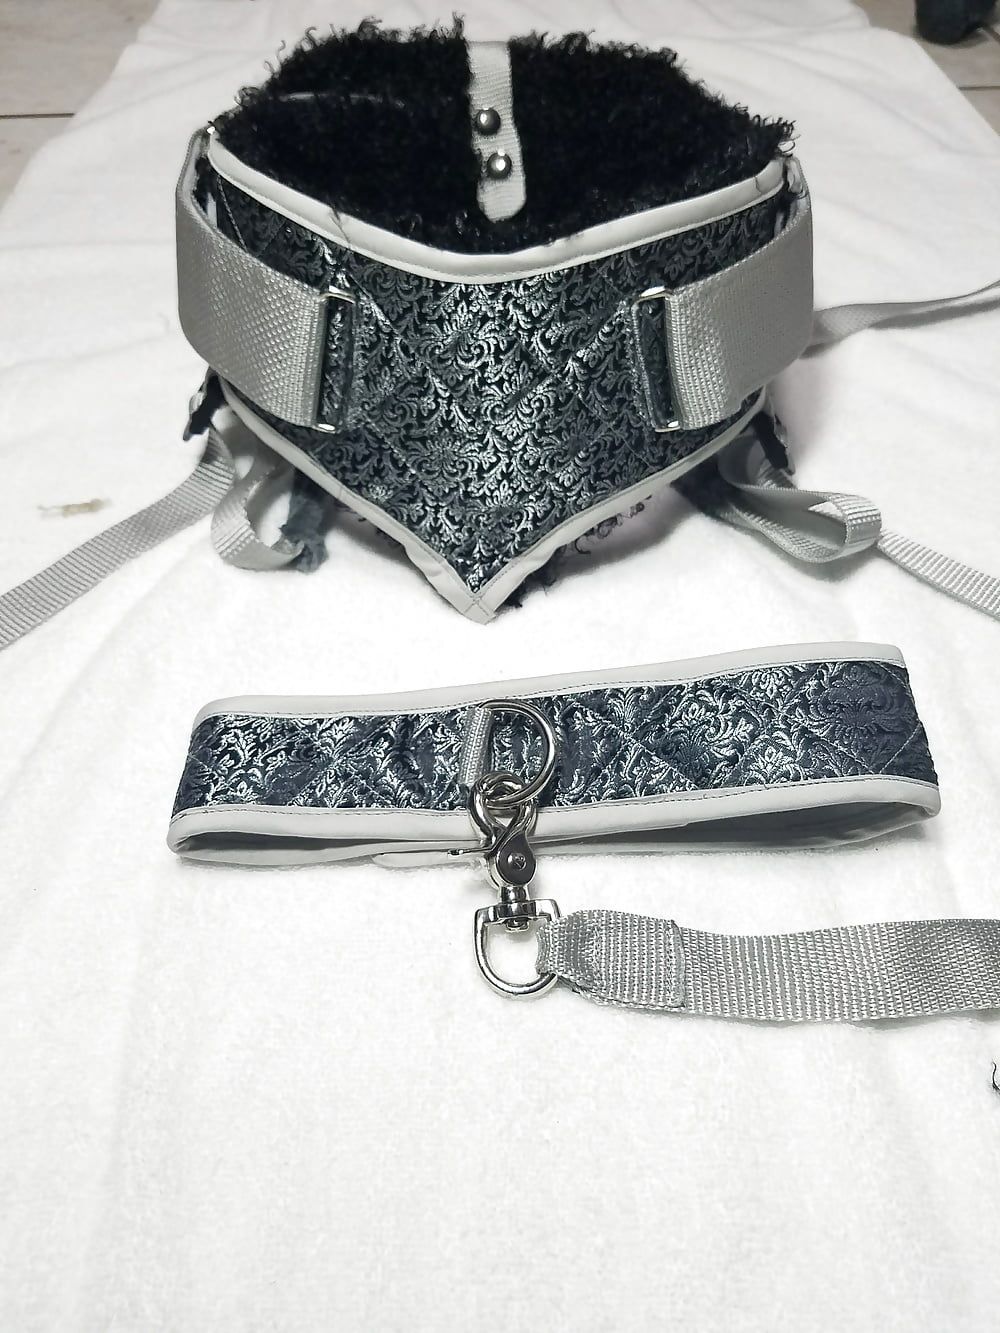 Strap-on Harnesses #14